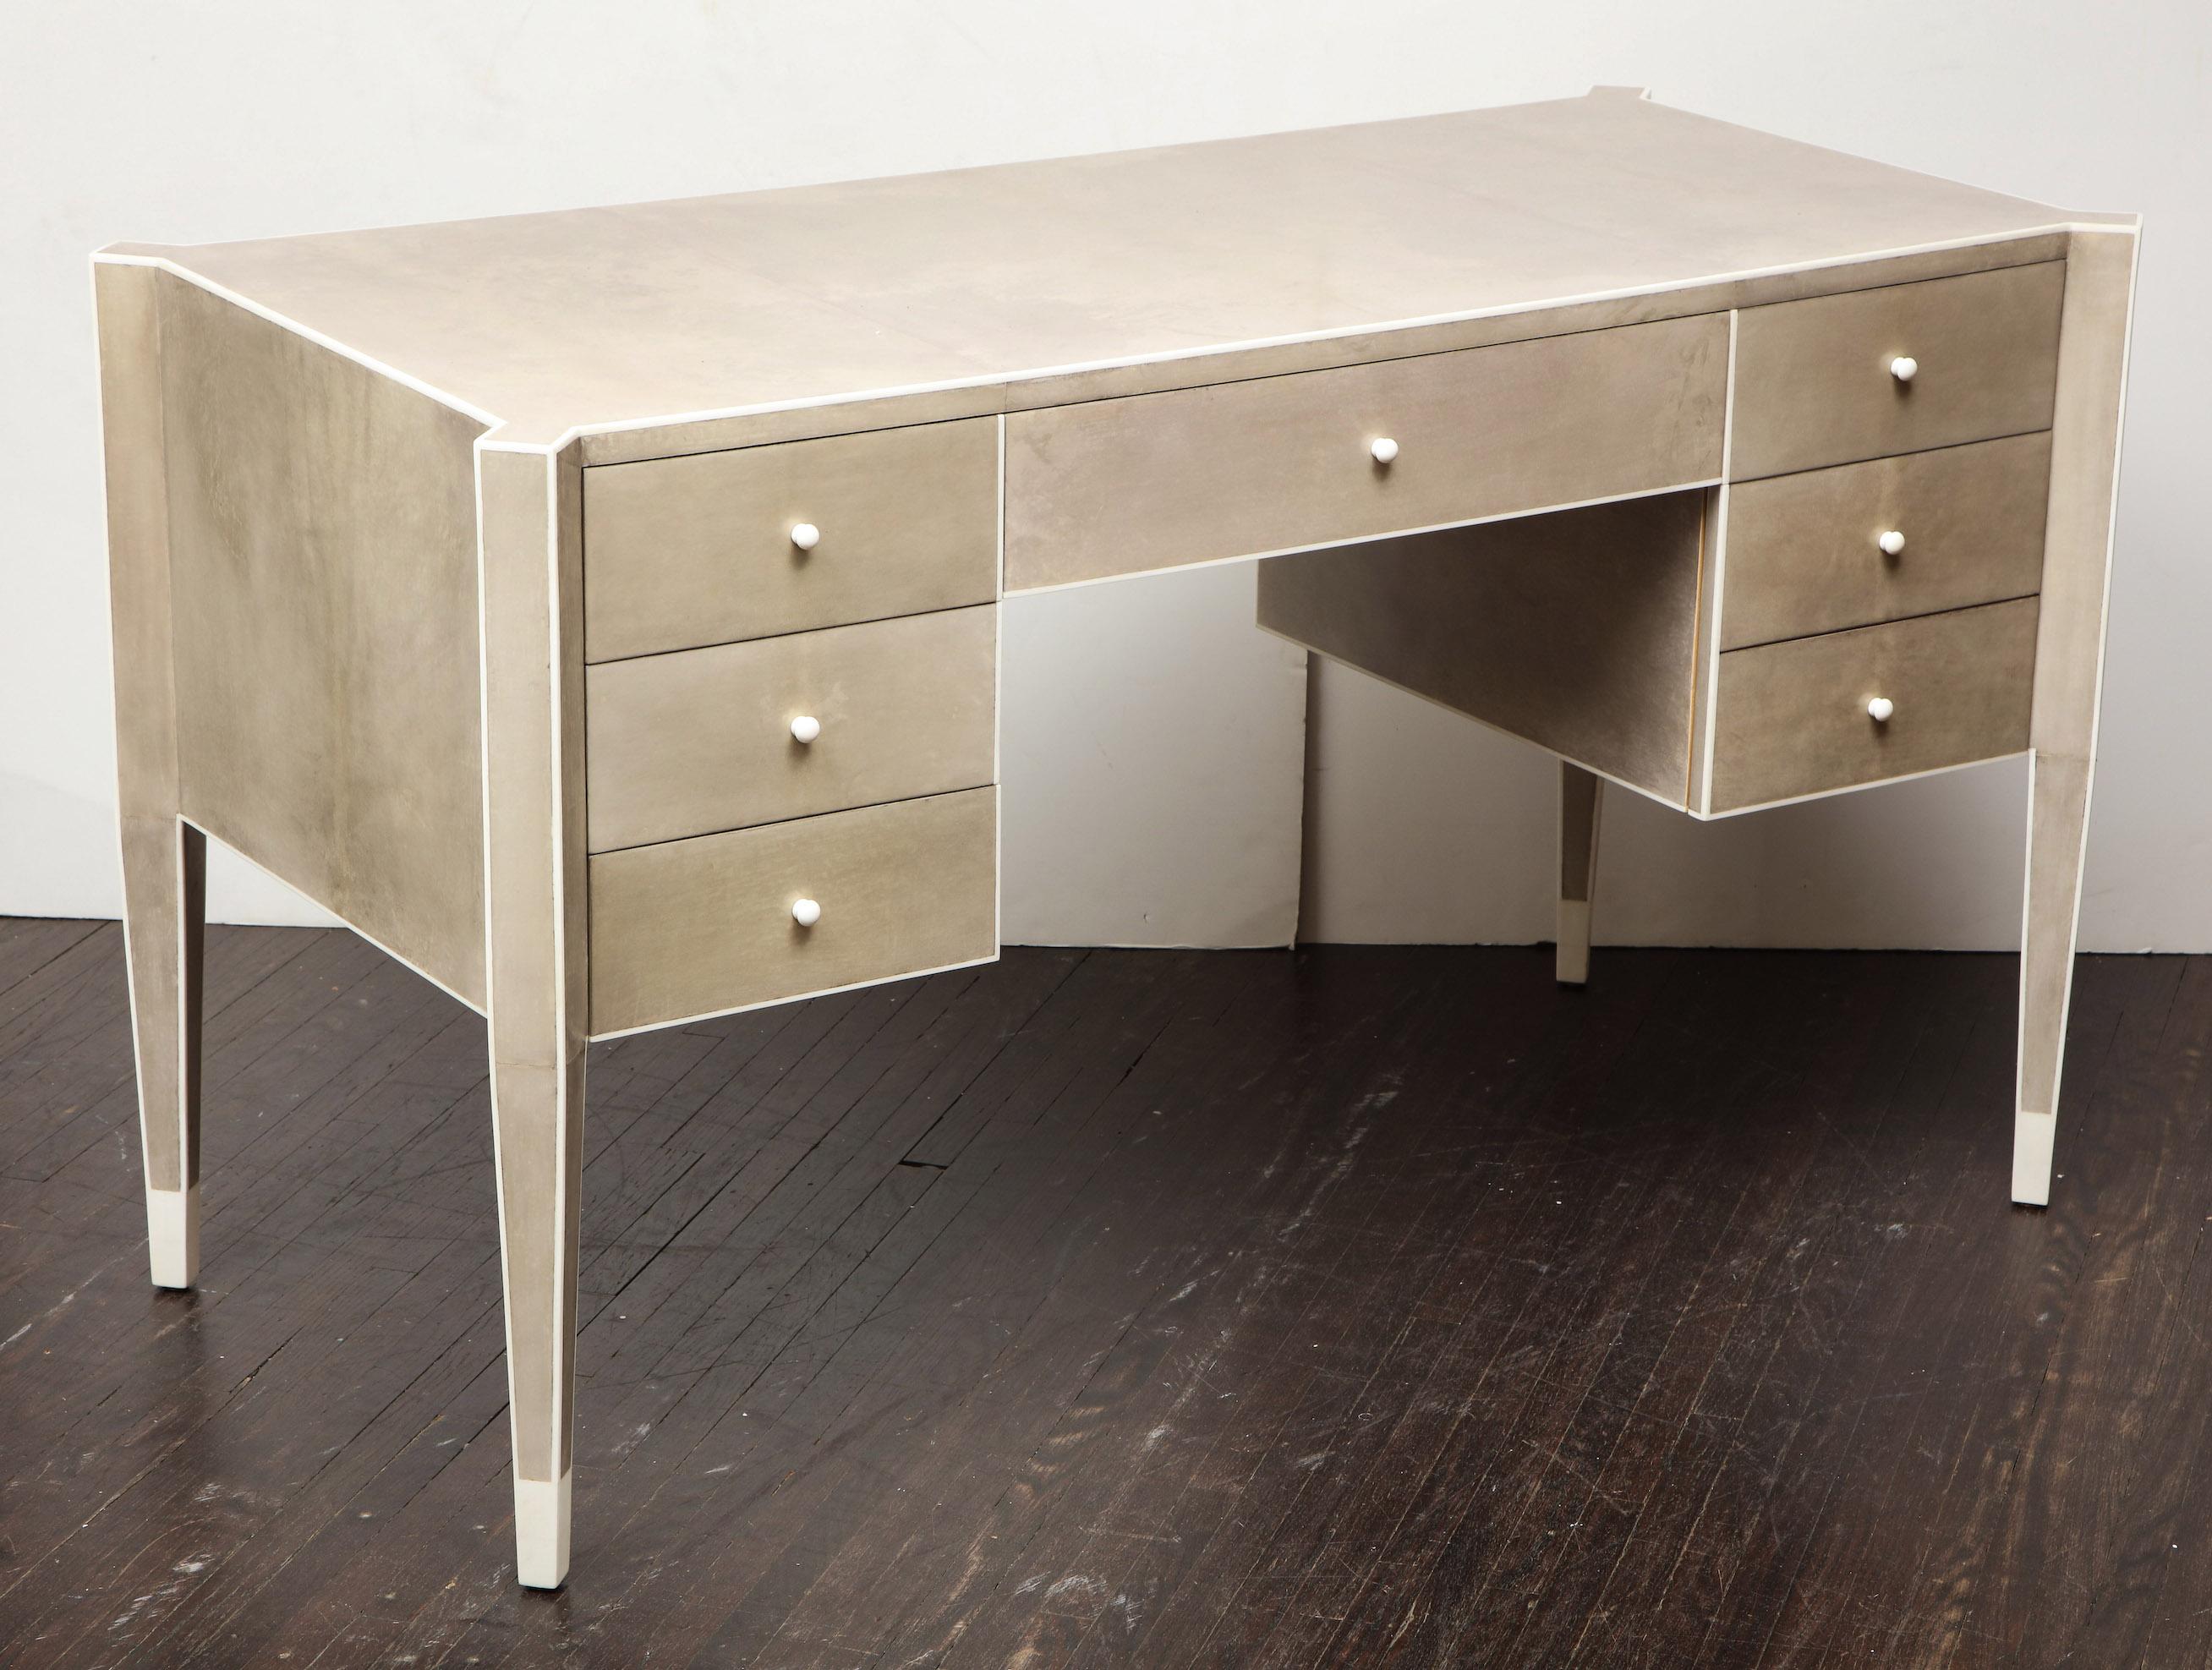 Made to order, custom desk covered in parchment with trim detail and pulls in bone. The desk shown is in mushroom grey (custom color). Custom dimensions available.